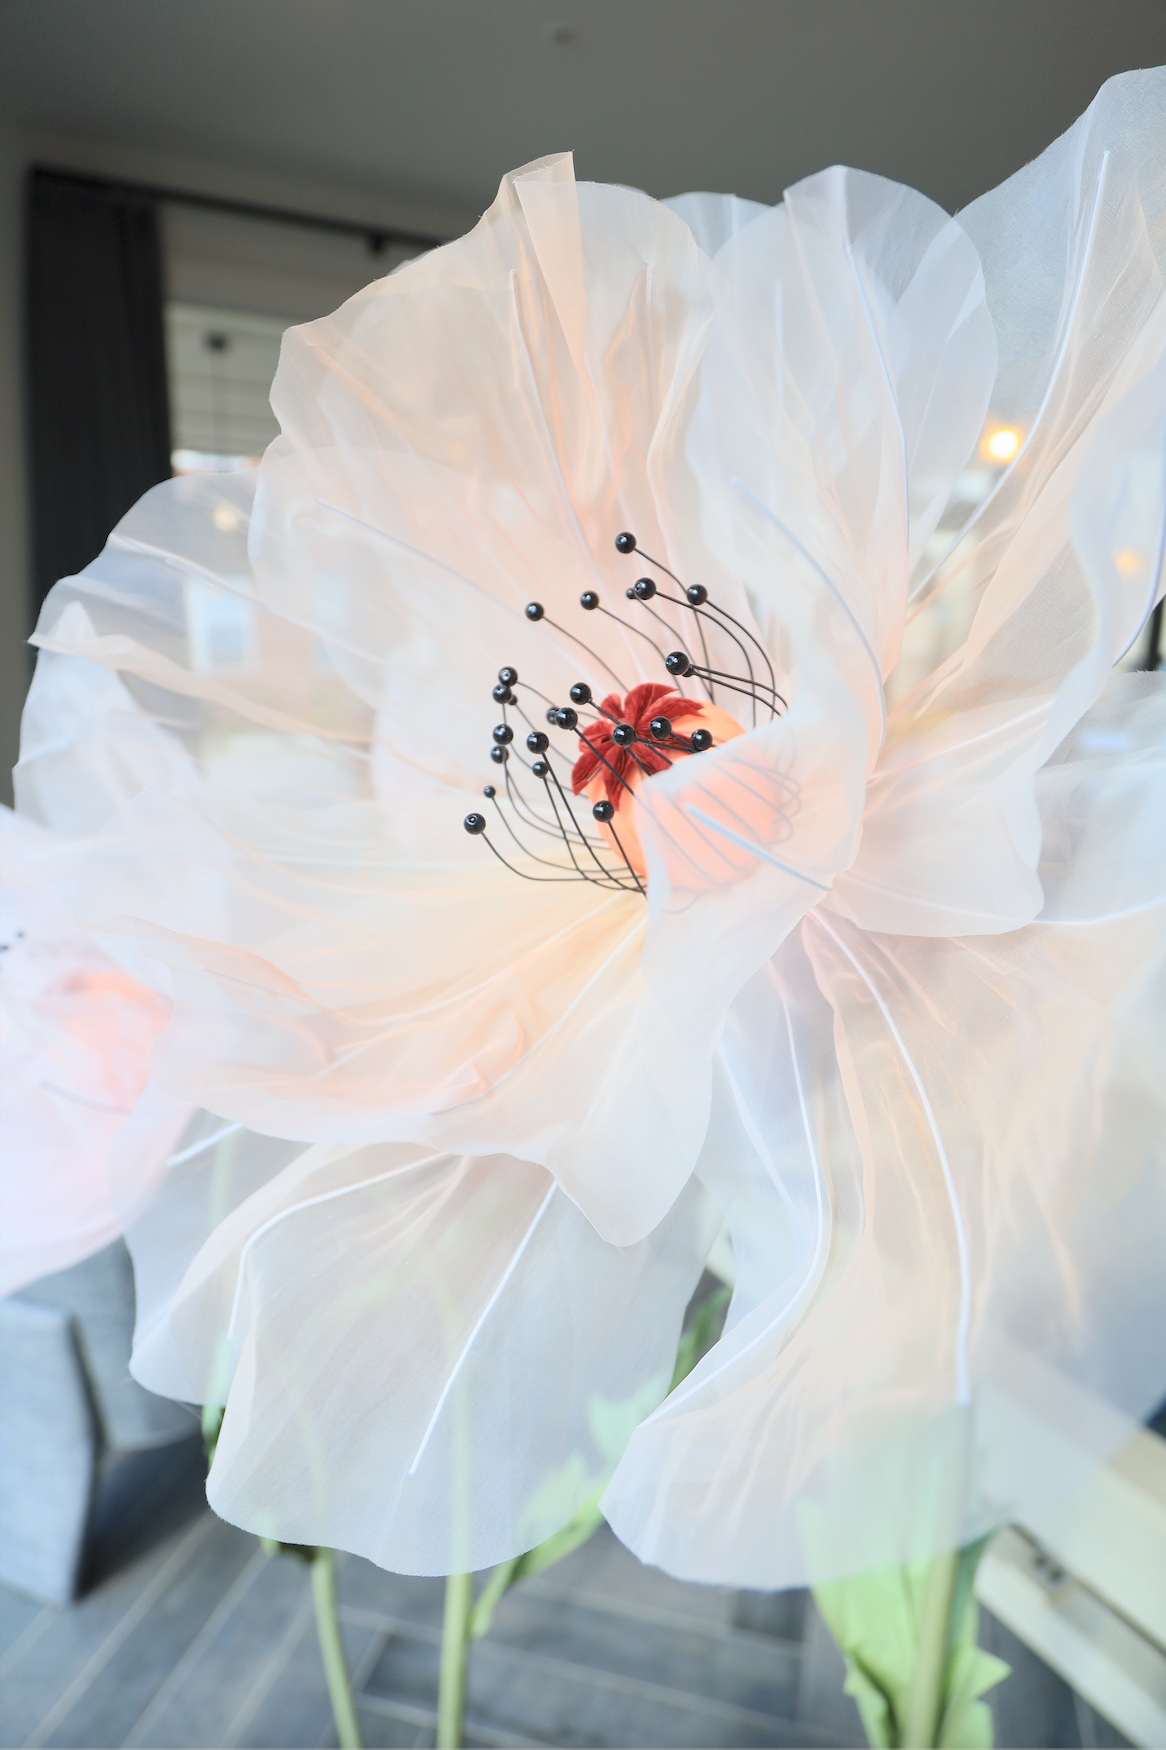 Giant Flowers decor for events